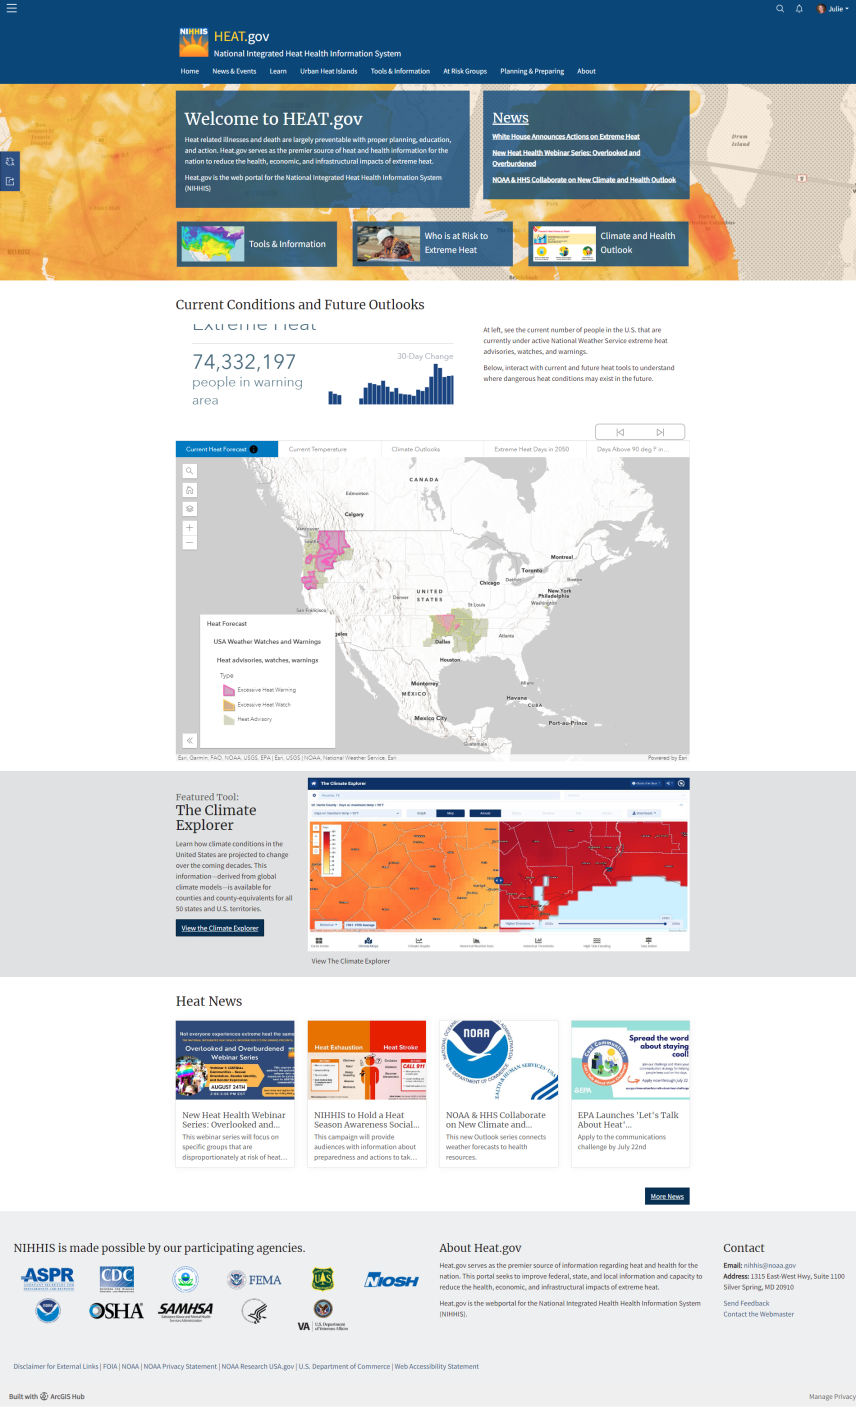 This screenshot shows the homepage of Heat.gov, a new one-stop website of information about extreme heat and health. The site was developed by the National Integrated Heat Health Information System and Esri, a private partner, to provide information and tools to improve federal, state, and local strategies to reduce the health, economic, and infrastructural impacts of extreme heat. 